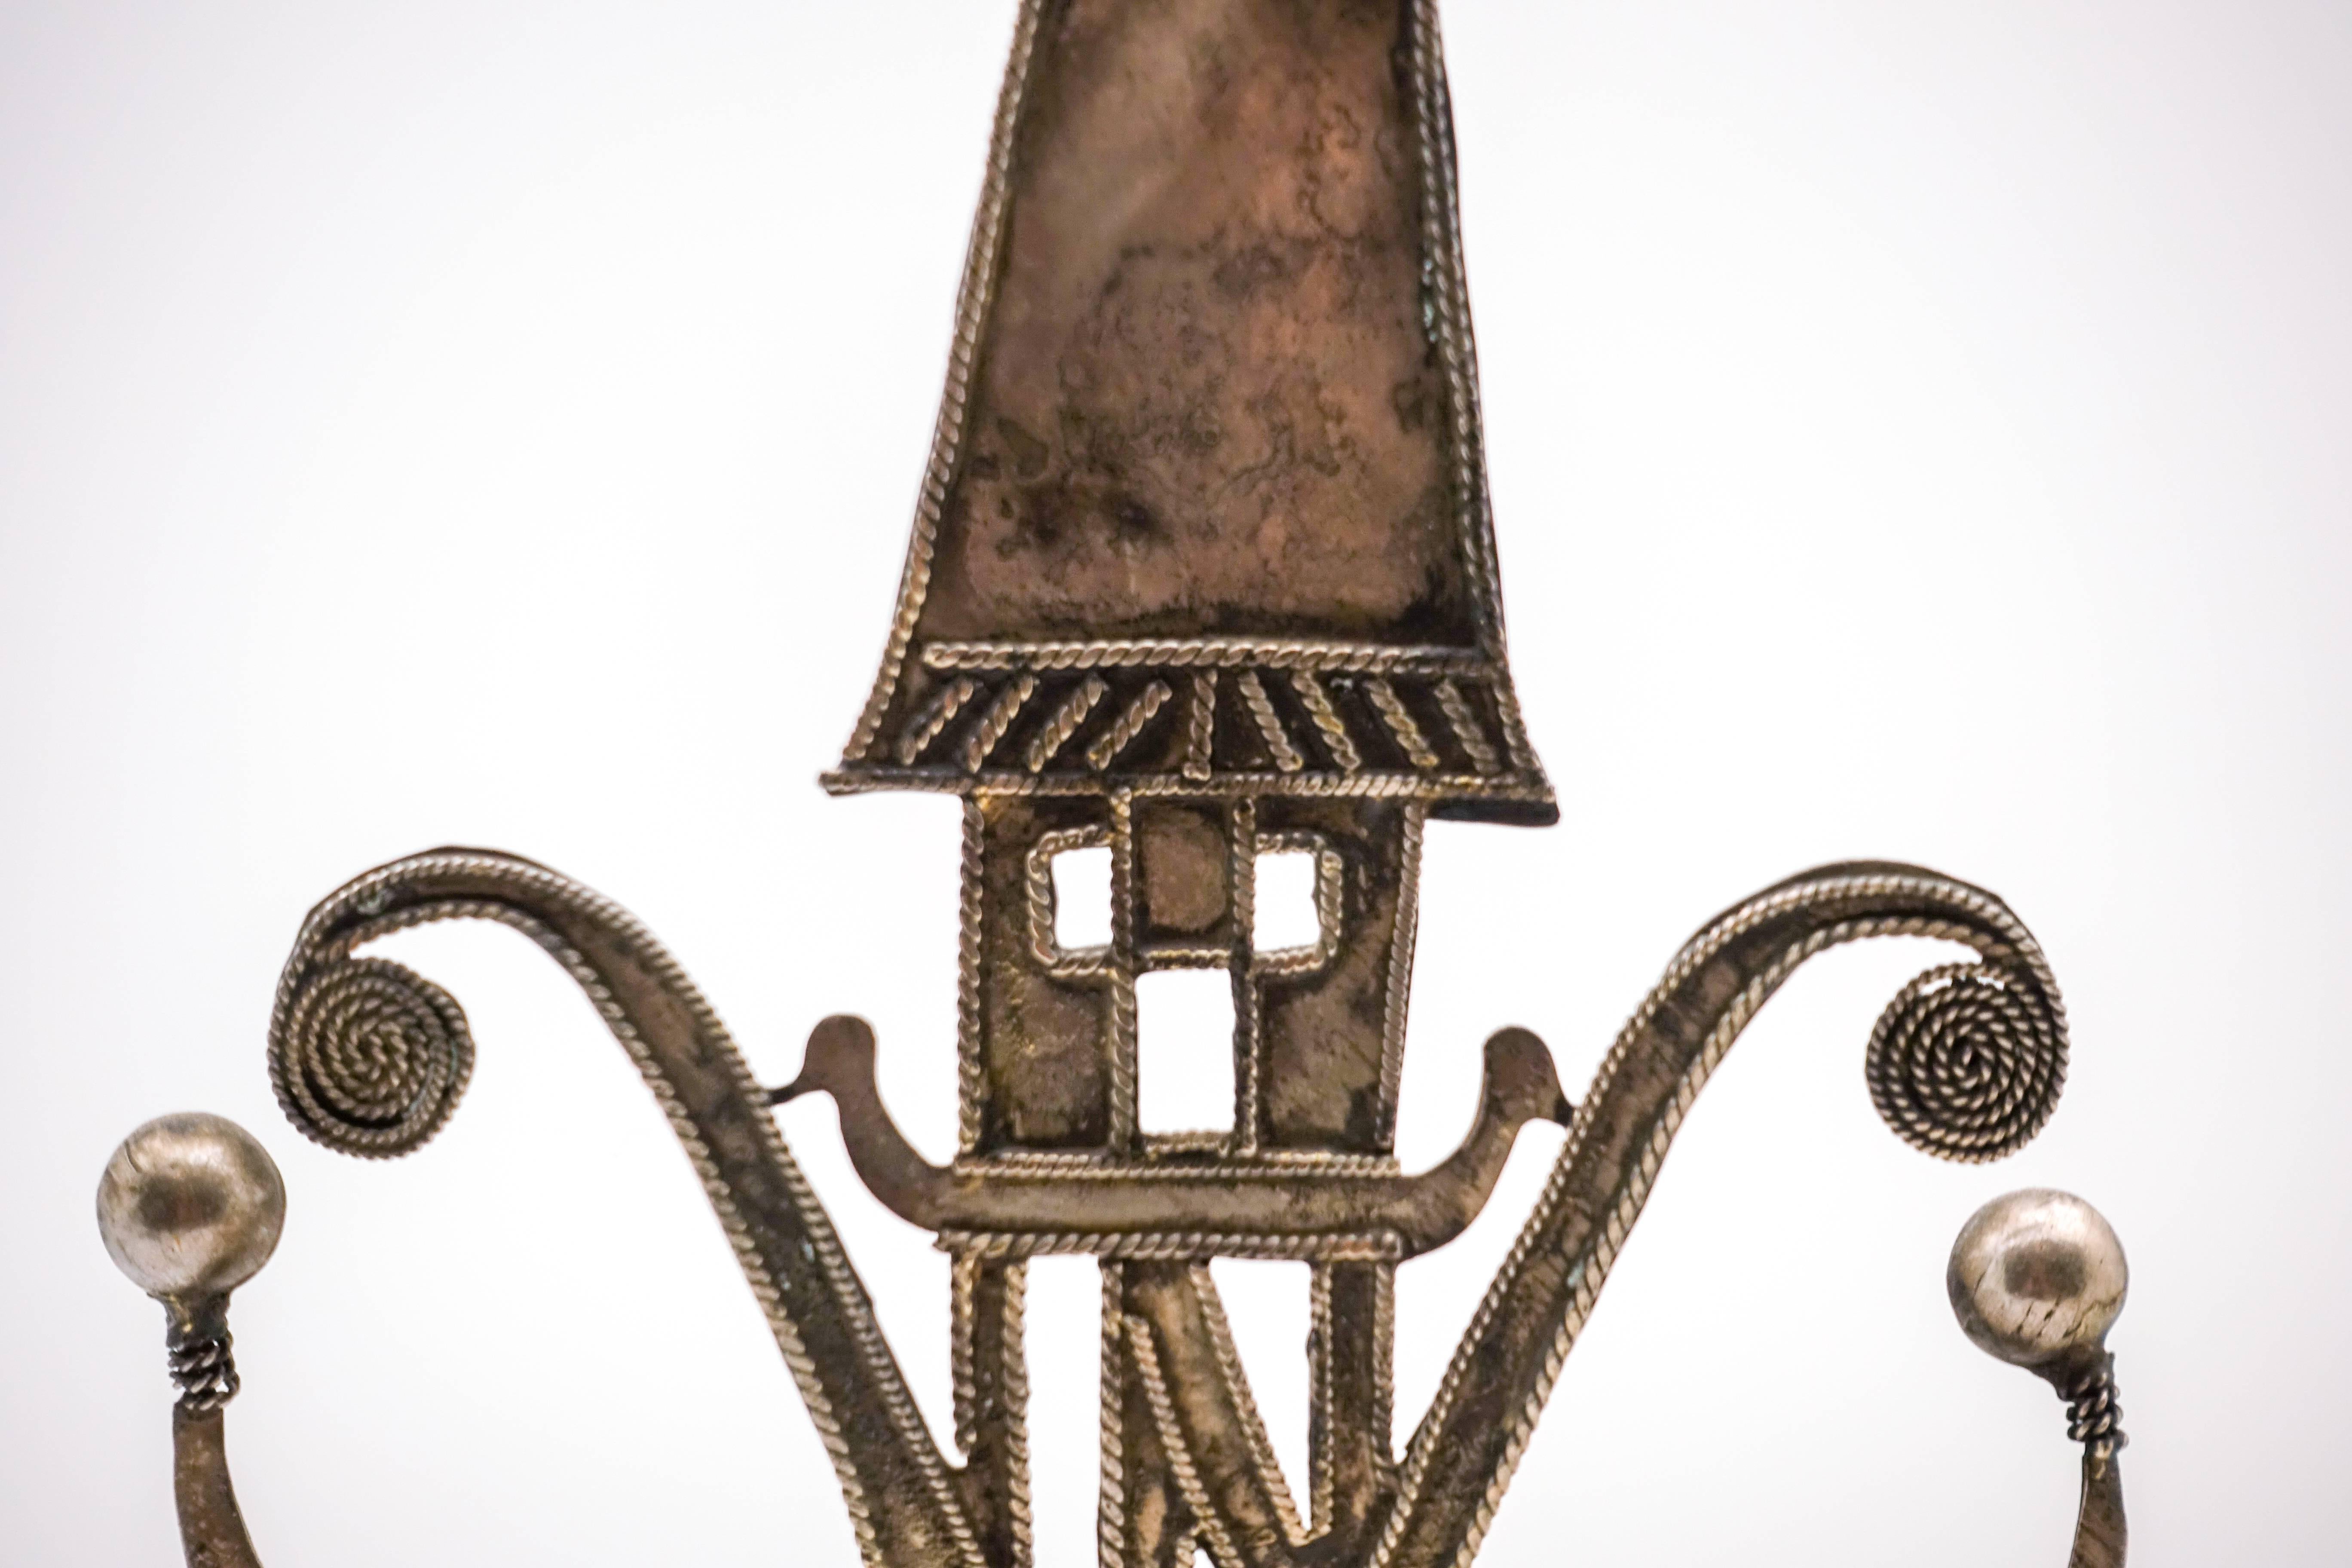 Man's silver alloy head ornament or crown from East Timor. These types of headbands are sometimes worm by women on special occasions.